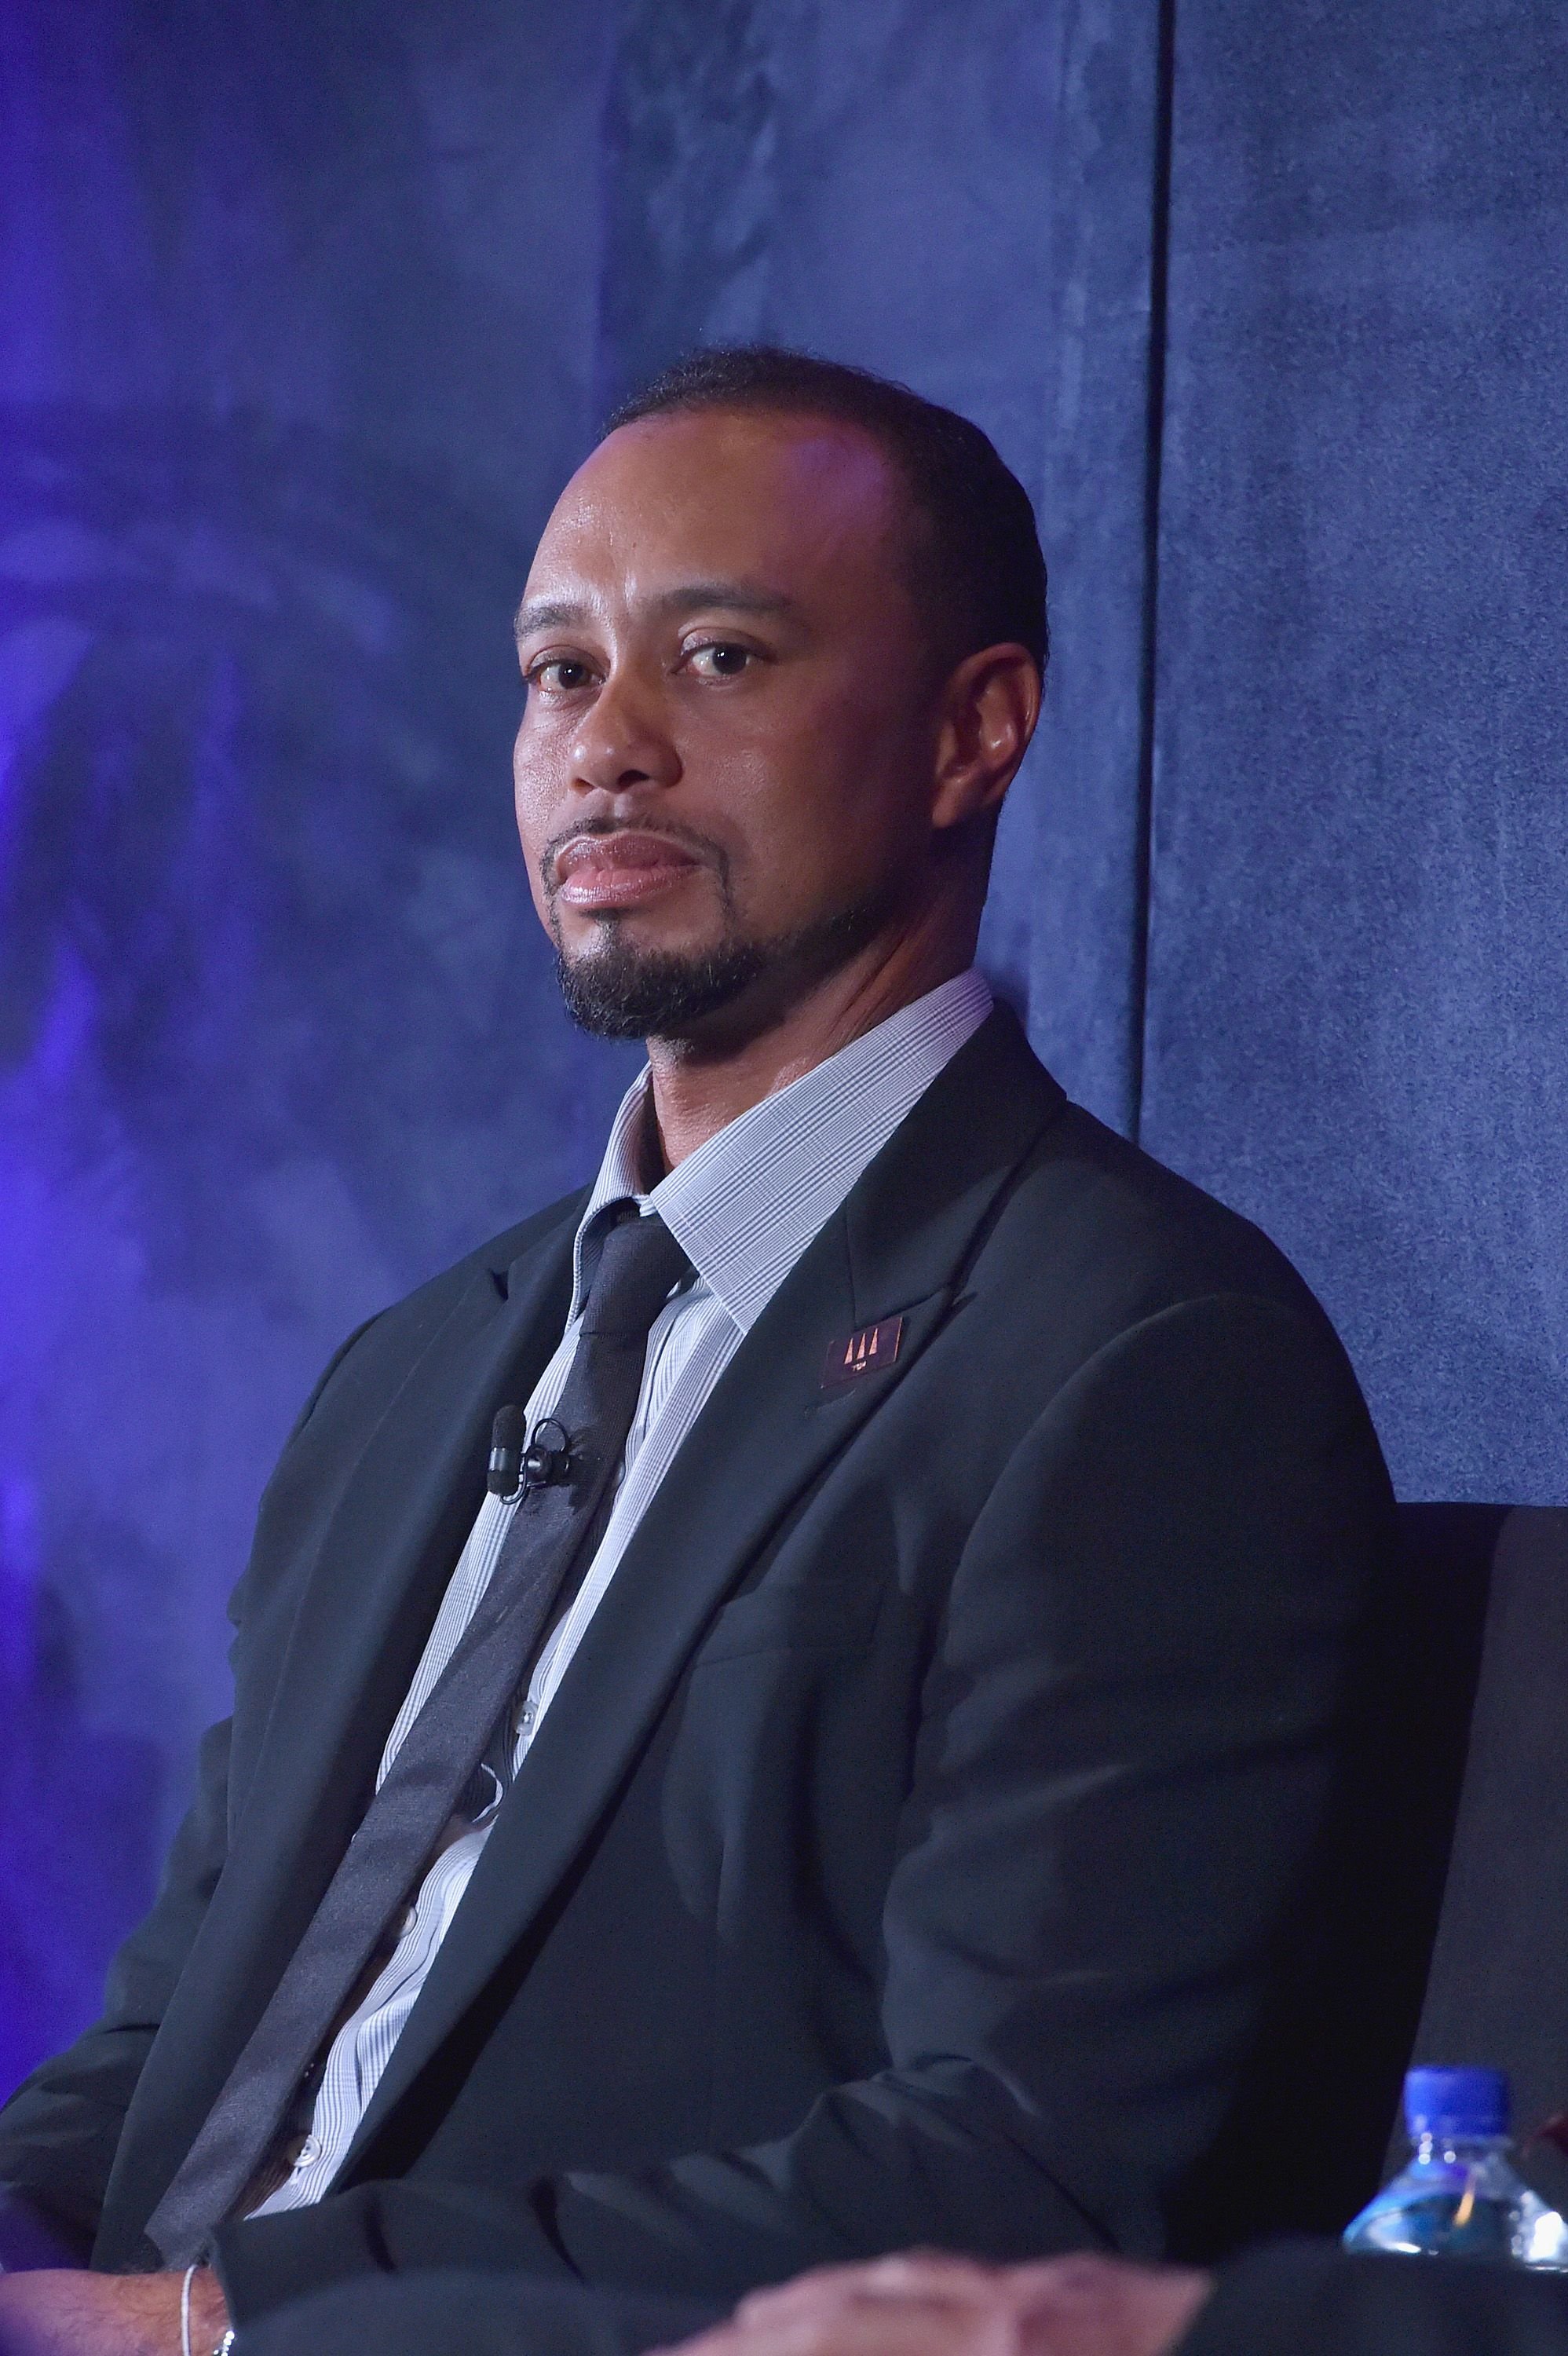 Tiger Woods speaks onstage during the Tiger Woods Foundation's 20th Anniversary Celebration at the New York Public Library on October 20, 2016 | Photo: Lester Cohen/Getty Images